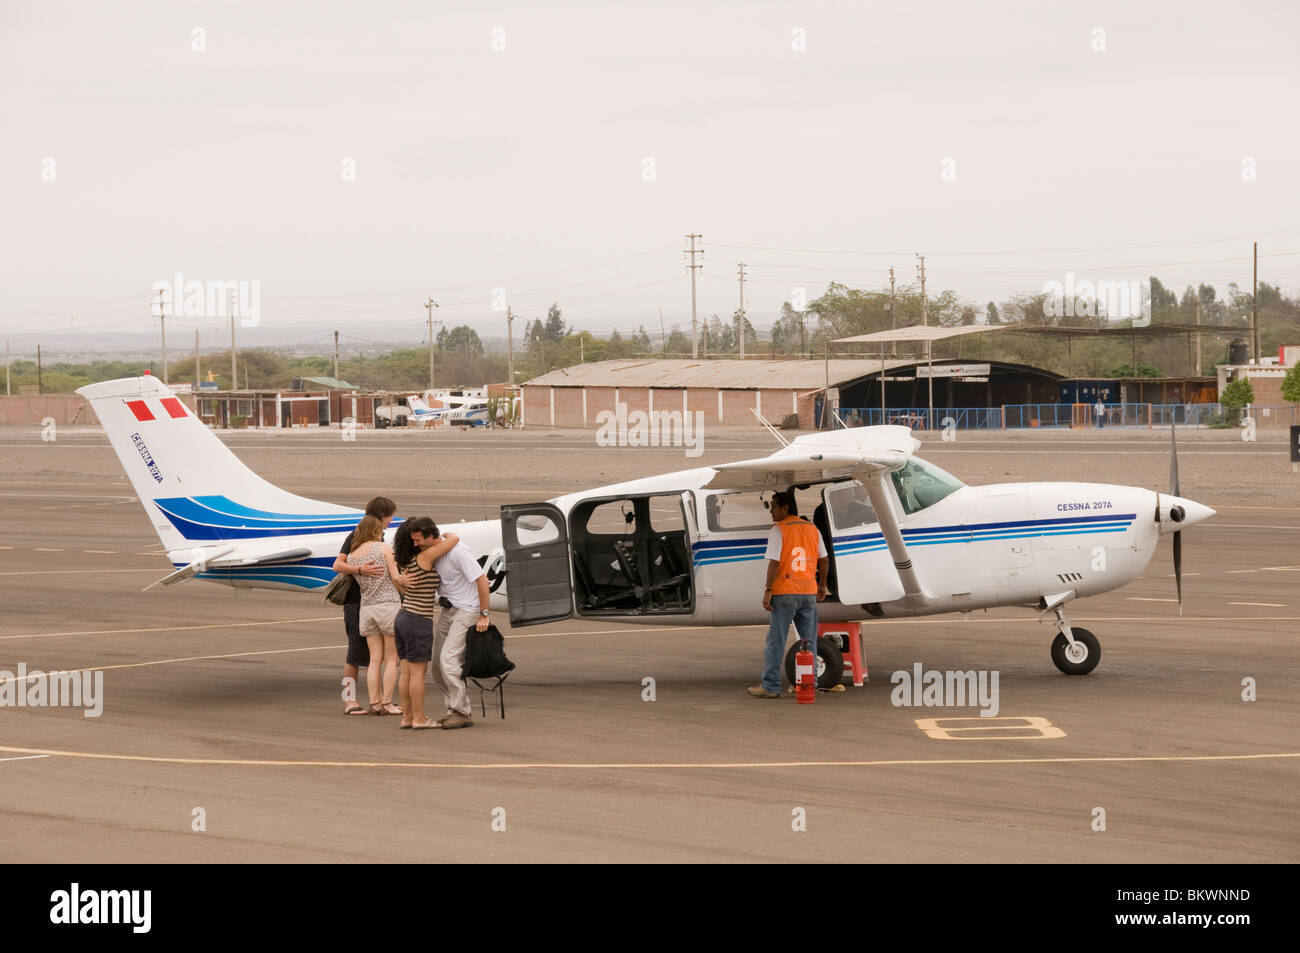 Passengers hugging in relief after safely landing from bumpy flight over Nazca lines, Peru Stock Photo